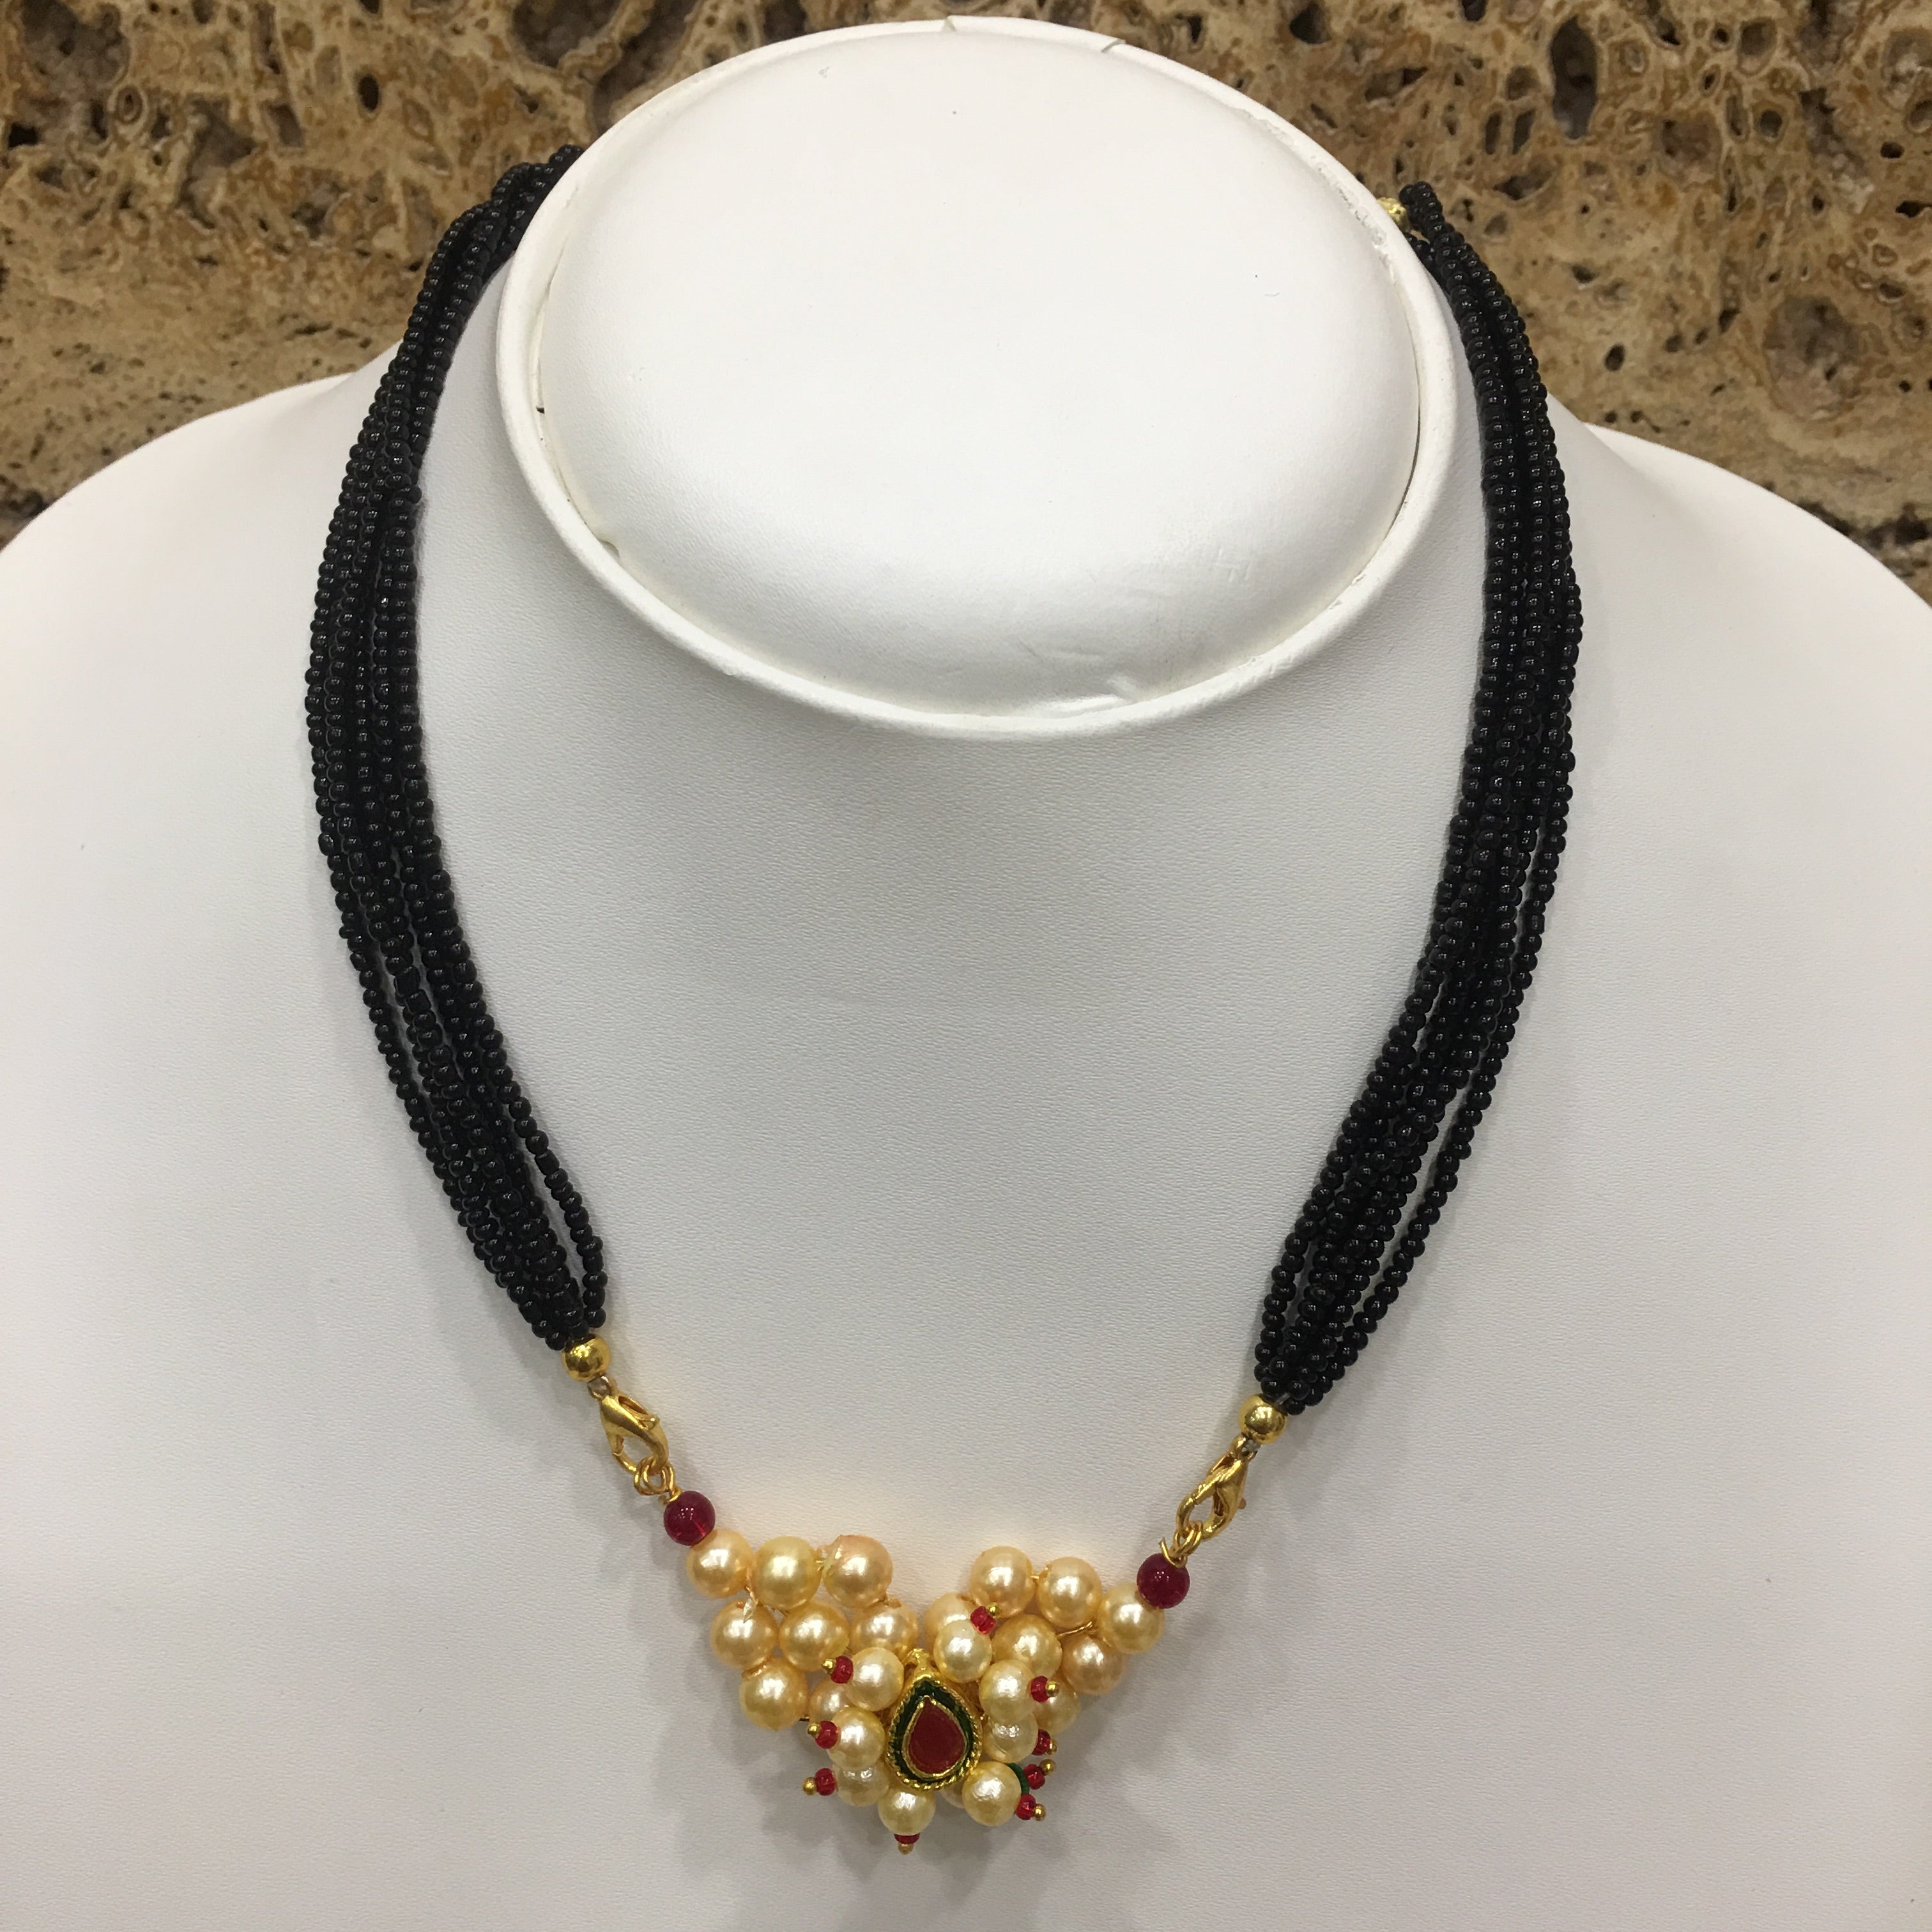 image for Short Mangalsutra Designs Gold Plated Latest Nath Pendant Multilayer Mangalsutra